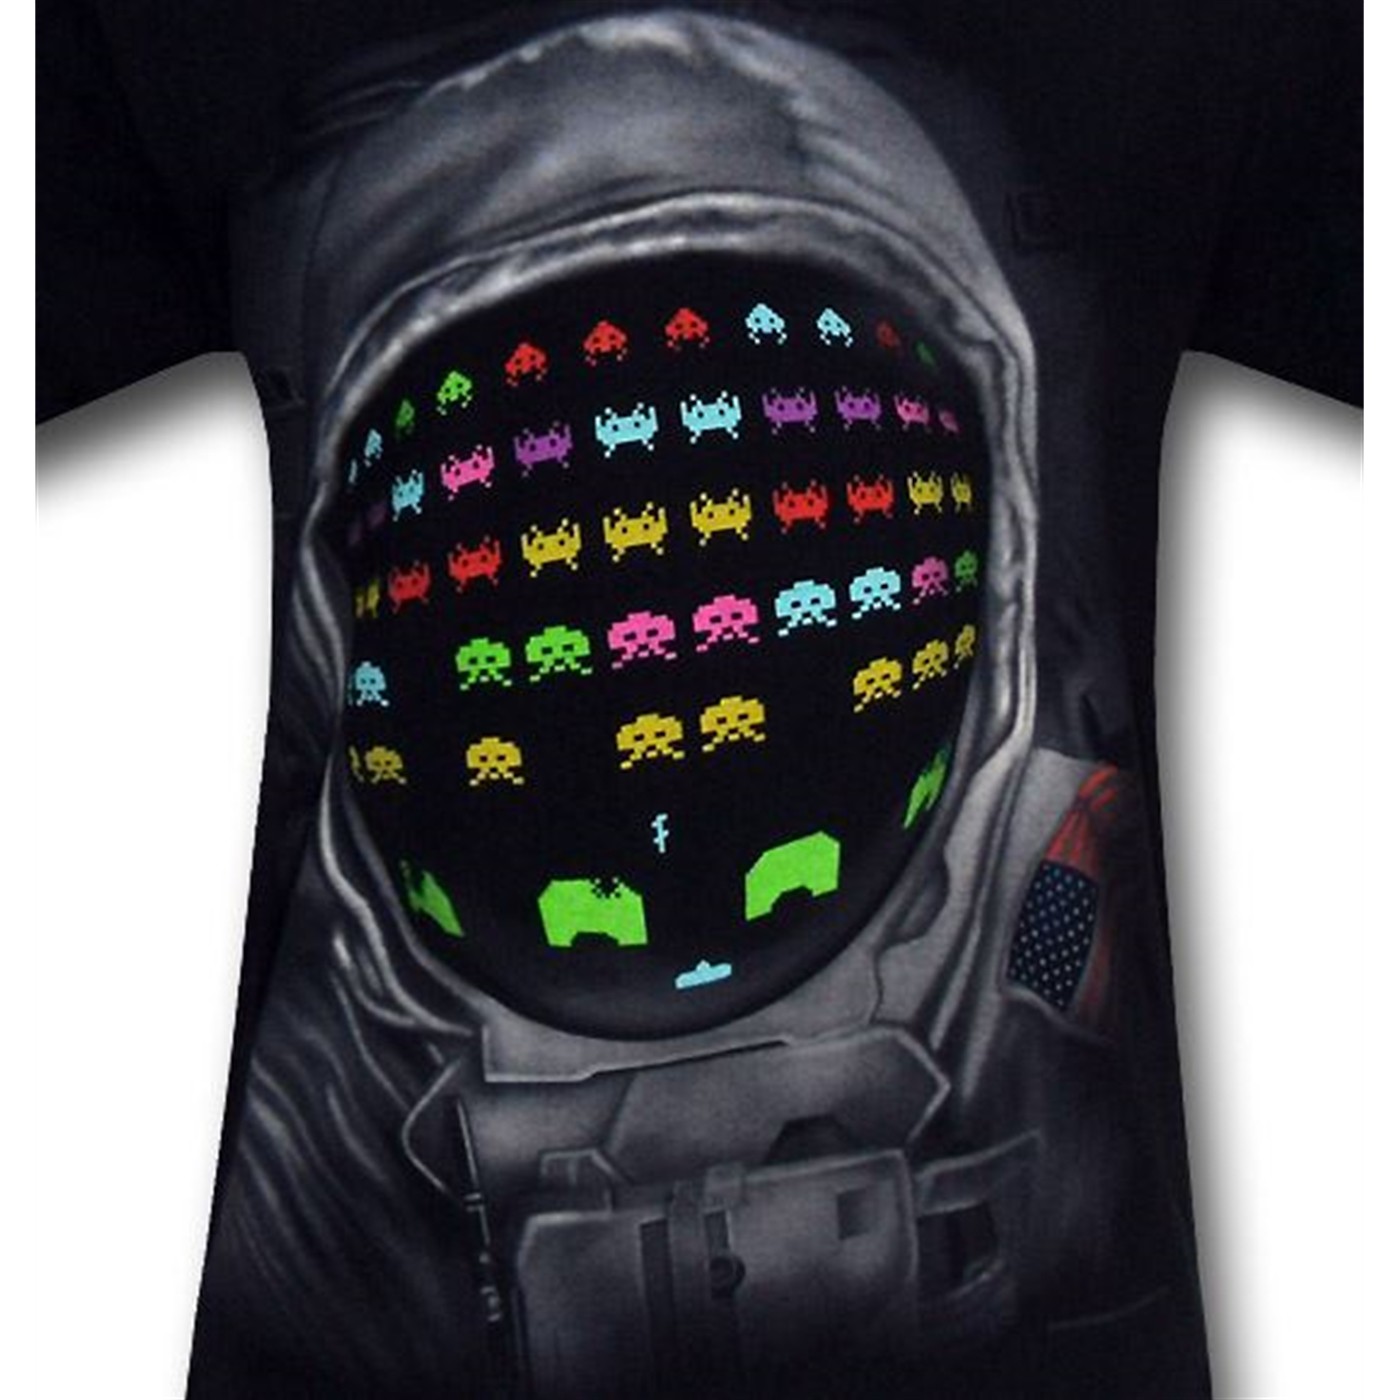 Space Invaders "Houston We Have A Problem" T-Shirt